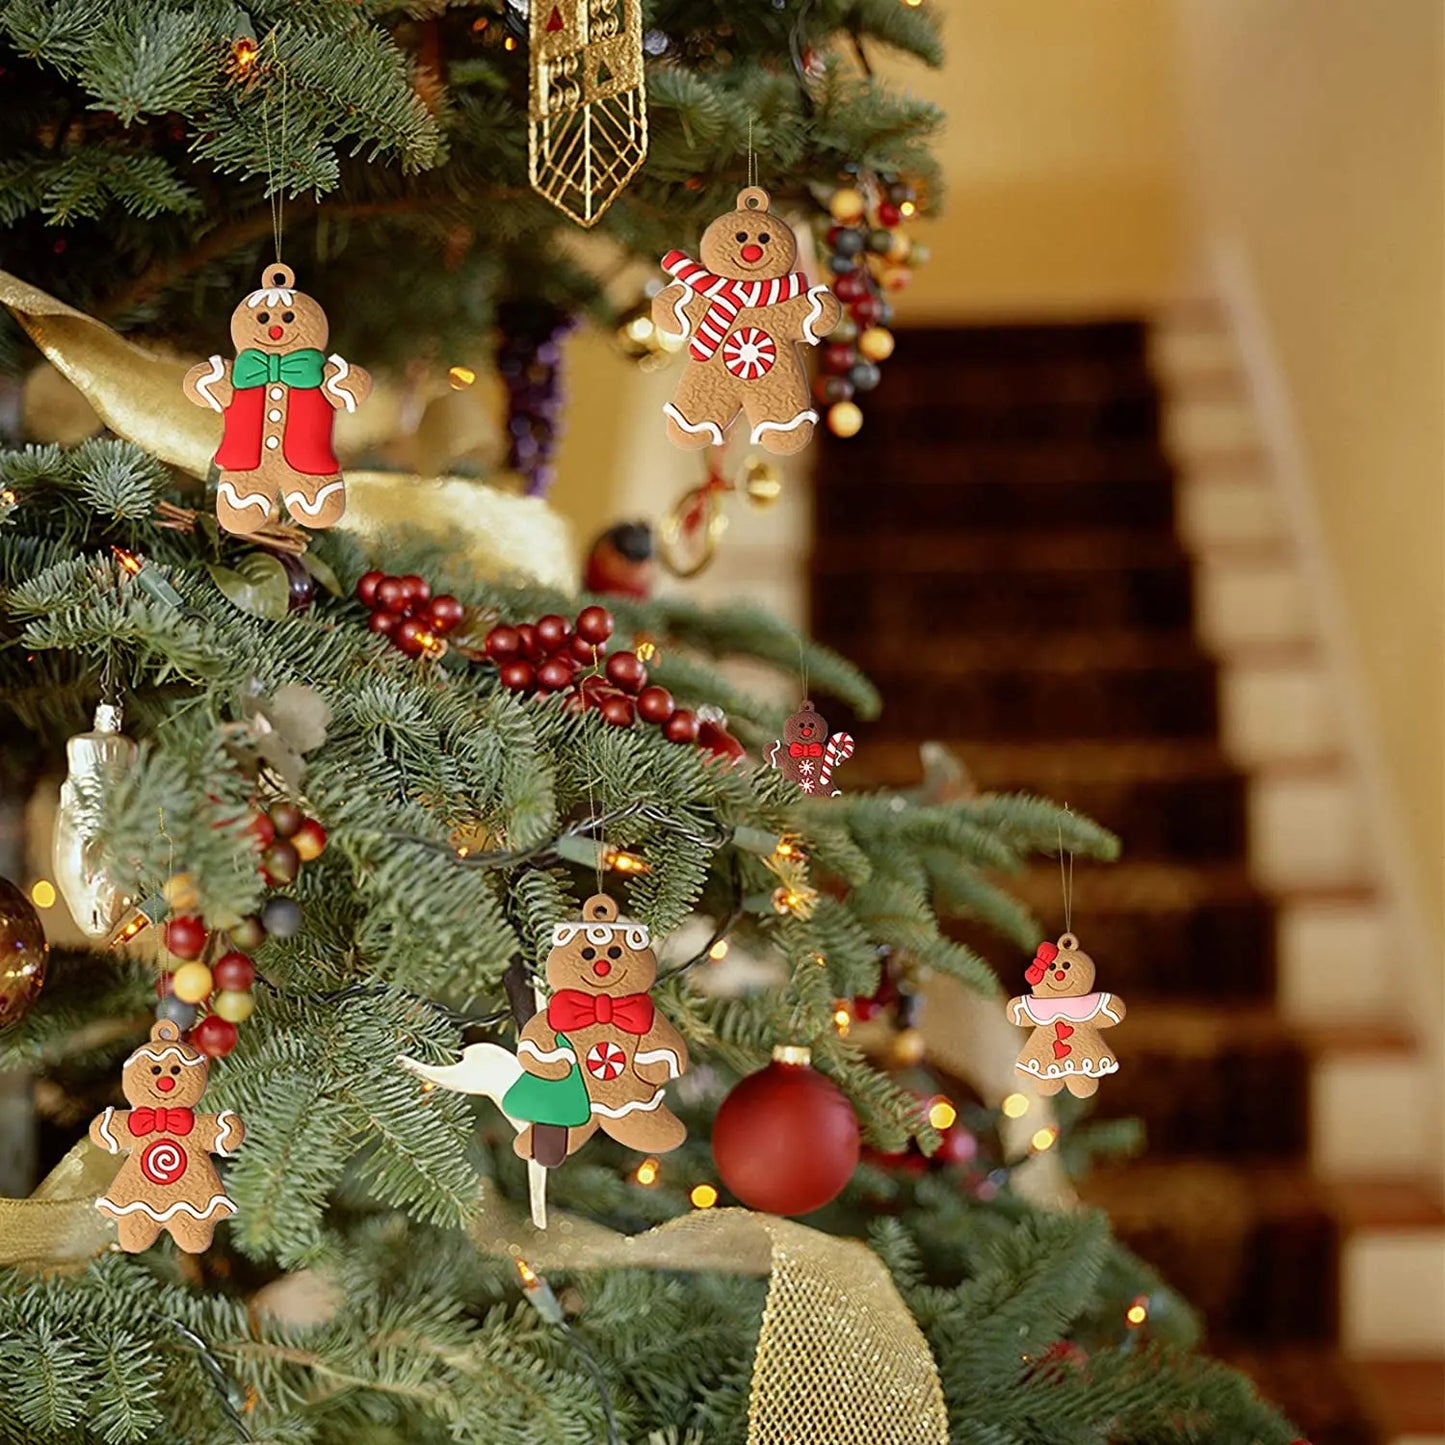 Gingerbread Man Ornaments for Christmas Tree